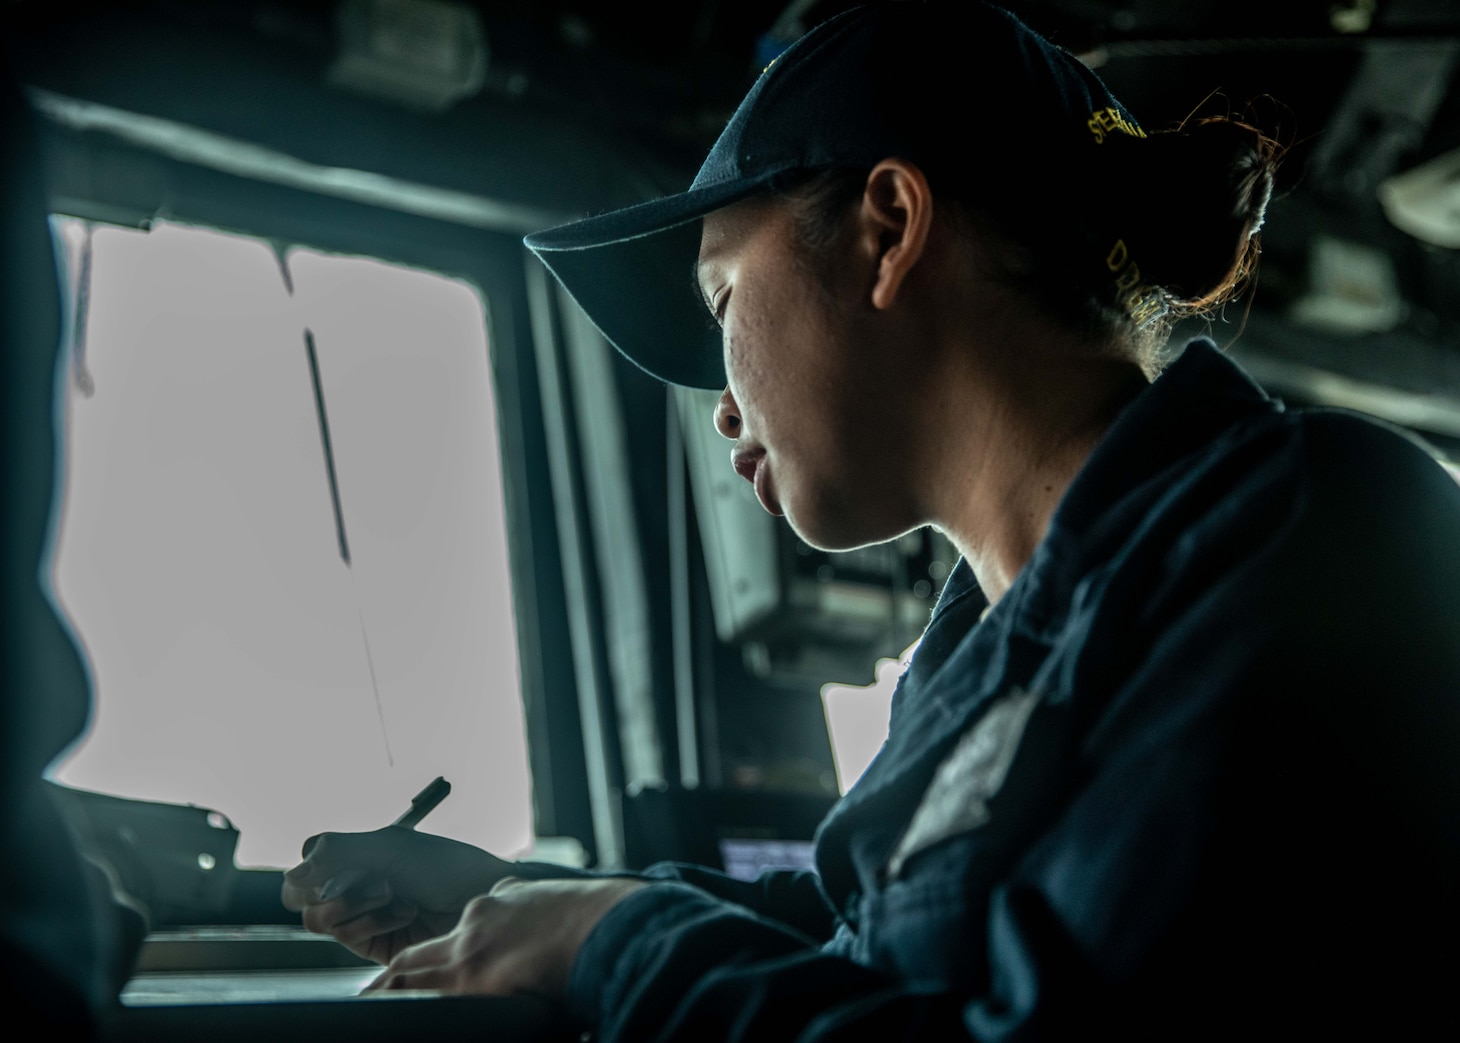 TAIWAN STRAIT (June 22, 2021) – Boatswain’s Mate 2nd Class Cheyenne Moscoso, from Fairfield, Calif., stands watch on the bridge while Arleigh Burke-class guided-missile destroyer USS Curtis Wilbur (DDG 54) as the ship conducts routine operations. Curtis Wilbur is assigned to Commander, Task Force 71/Destroyer Squadron (DESRON) 15, the Navy’s largest forward-deployed DESRON and U.S. 7th Fleet’s principal surface force.